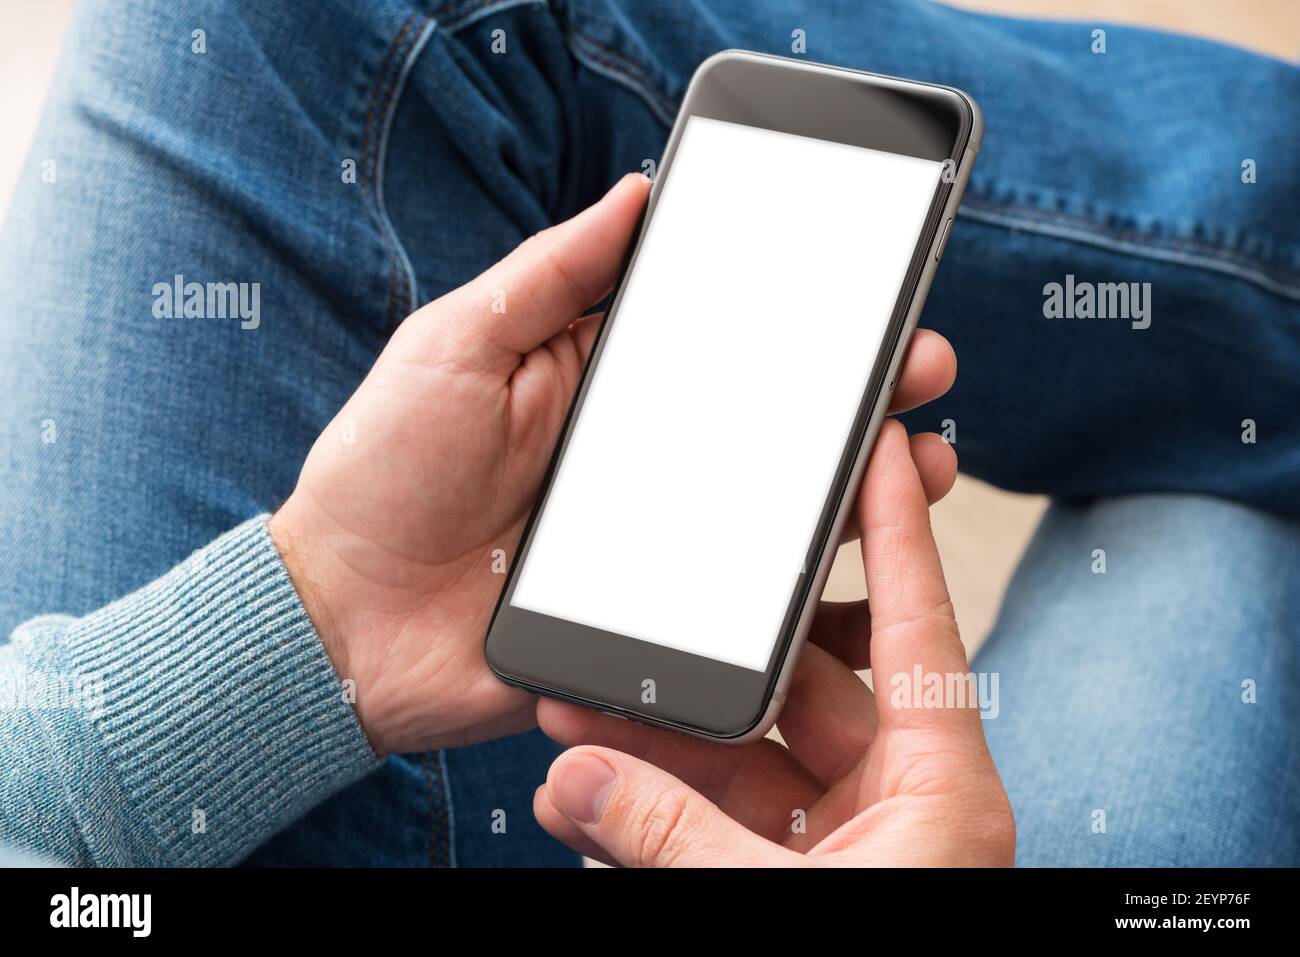 Smartphone in man#39;s hands. Clipping path included. Stock Photo